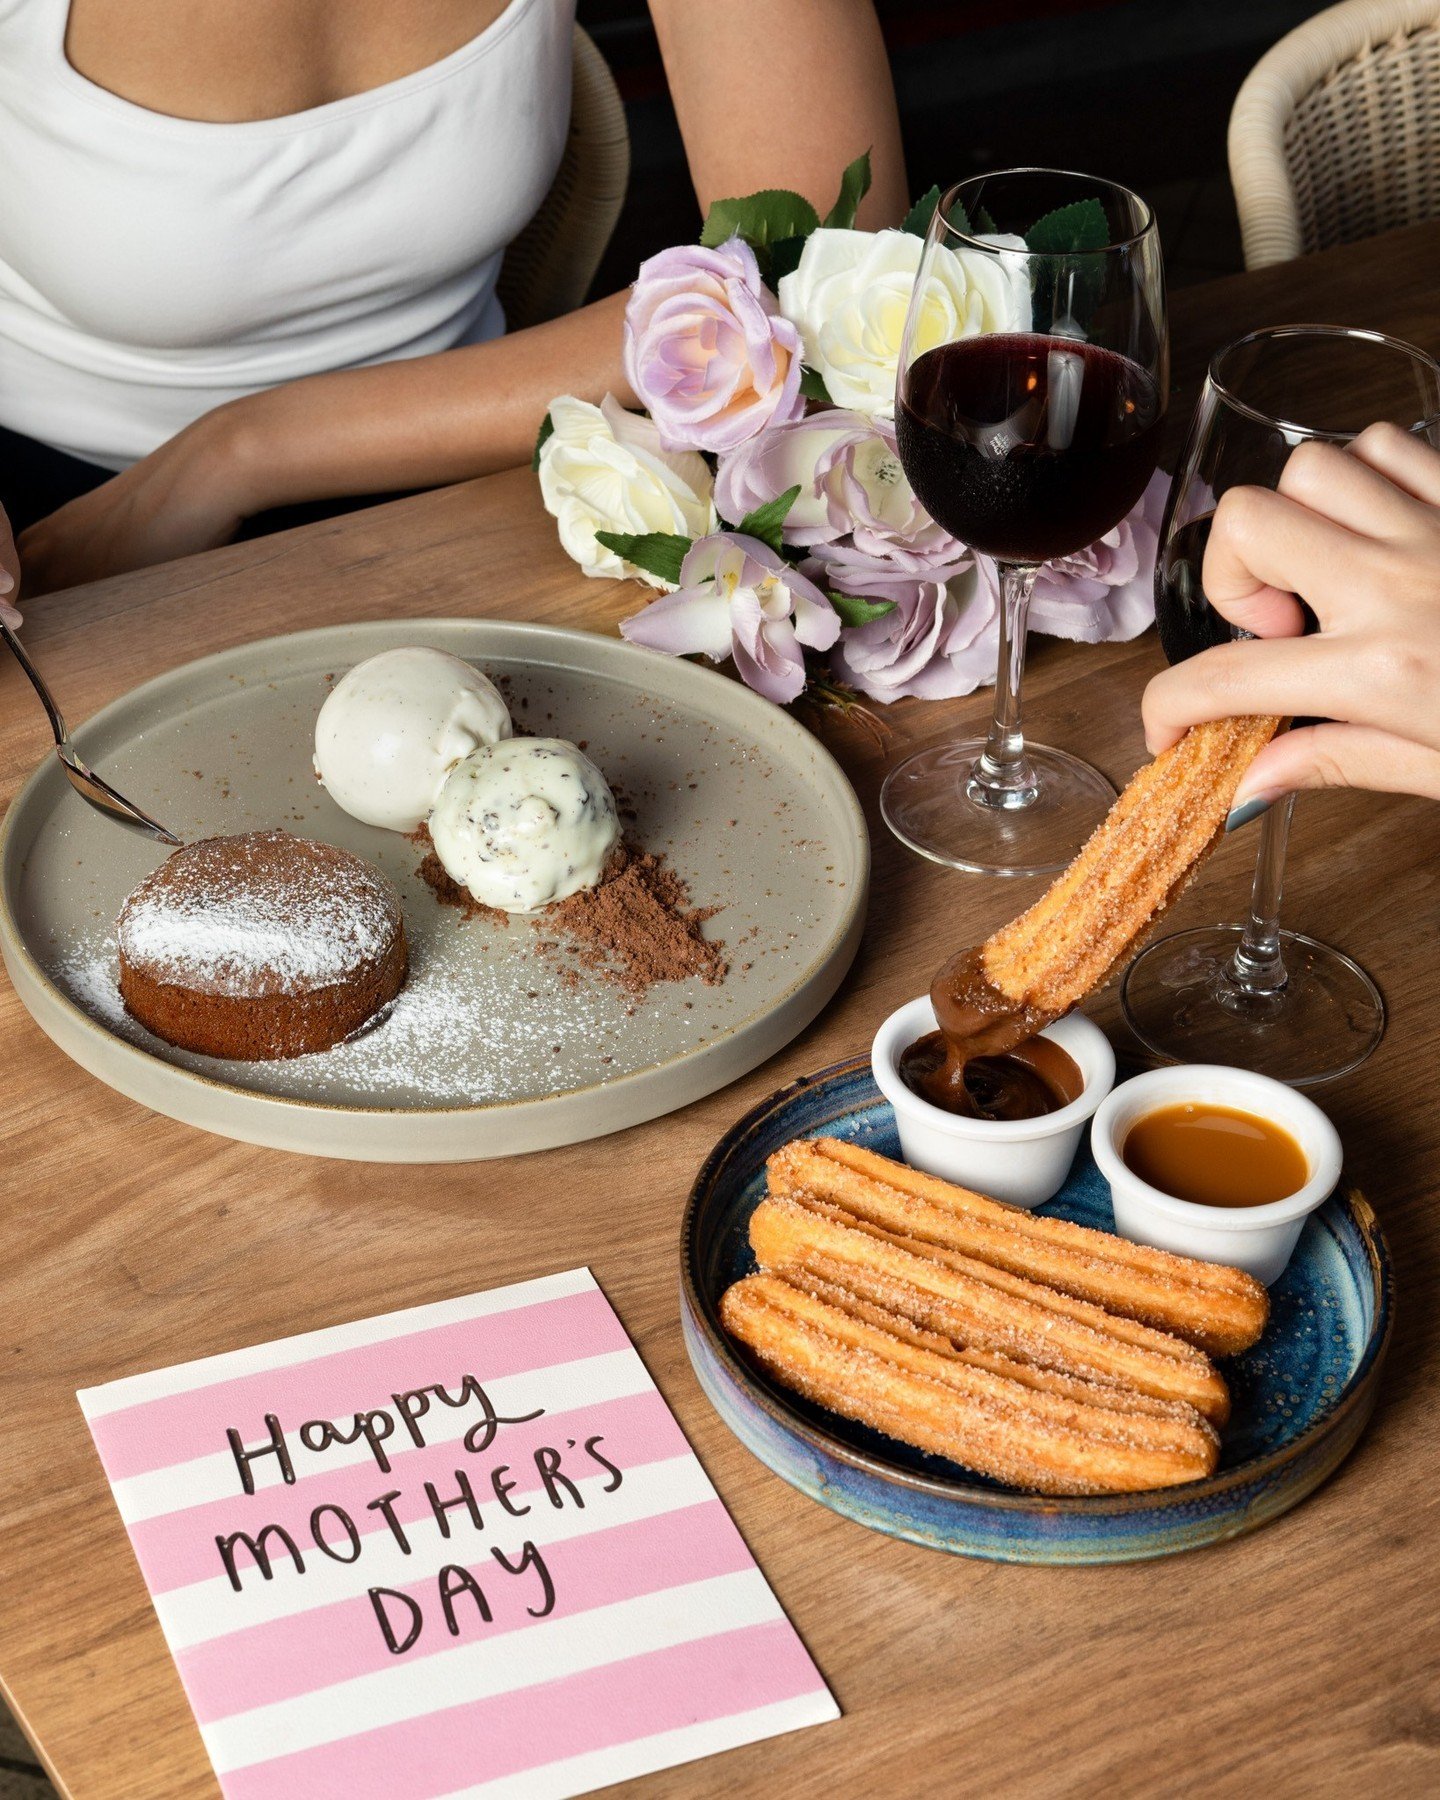 Let's celebrate the incredible mujeres in our lives this Mother's Day! Why not treat mam&aacute; to a fiesta of flavours at Super Loco? Indulge her sweet tooth with our Super Churros or our decadent Chocolate Lava Cake. And what better way to elevate